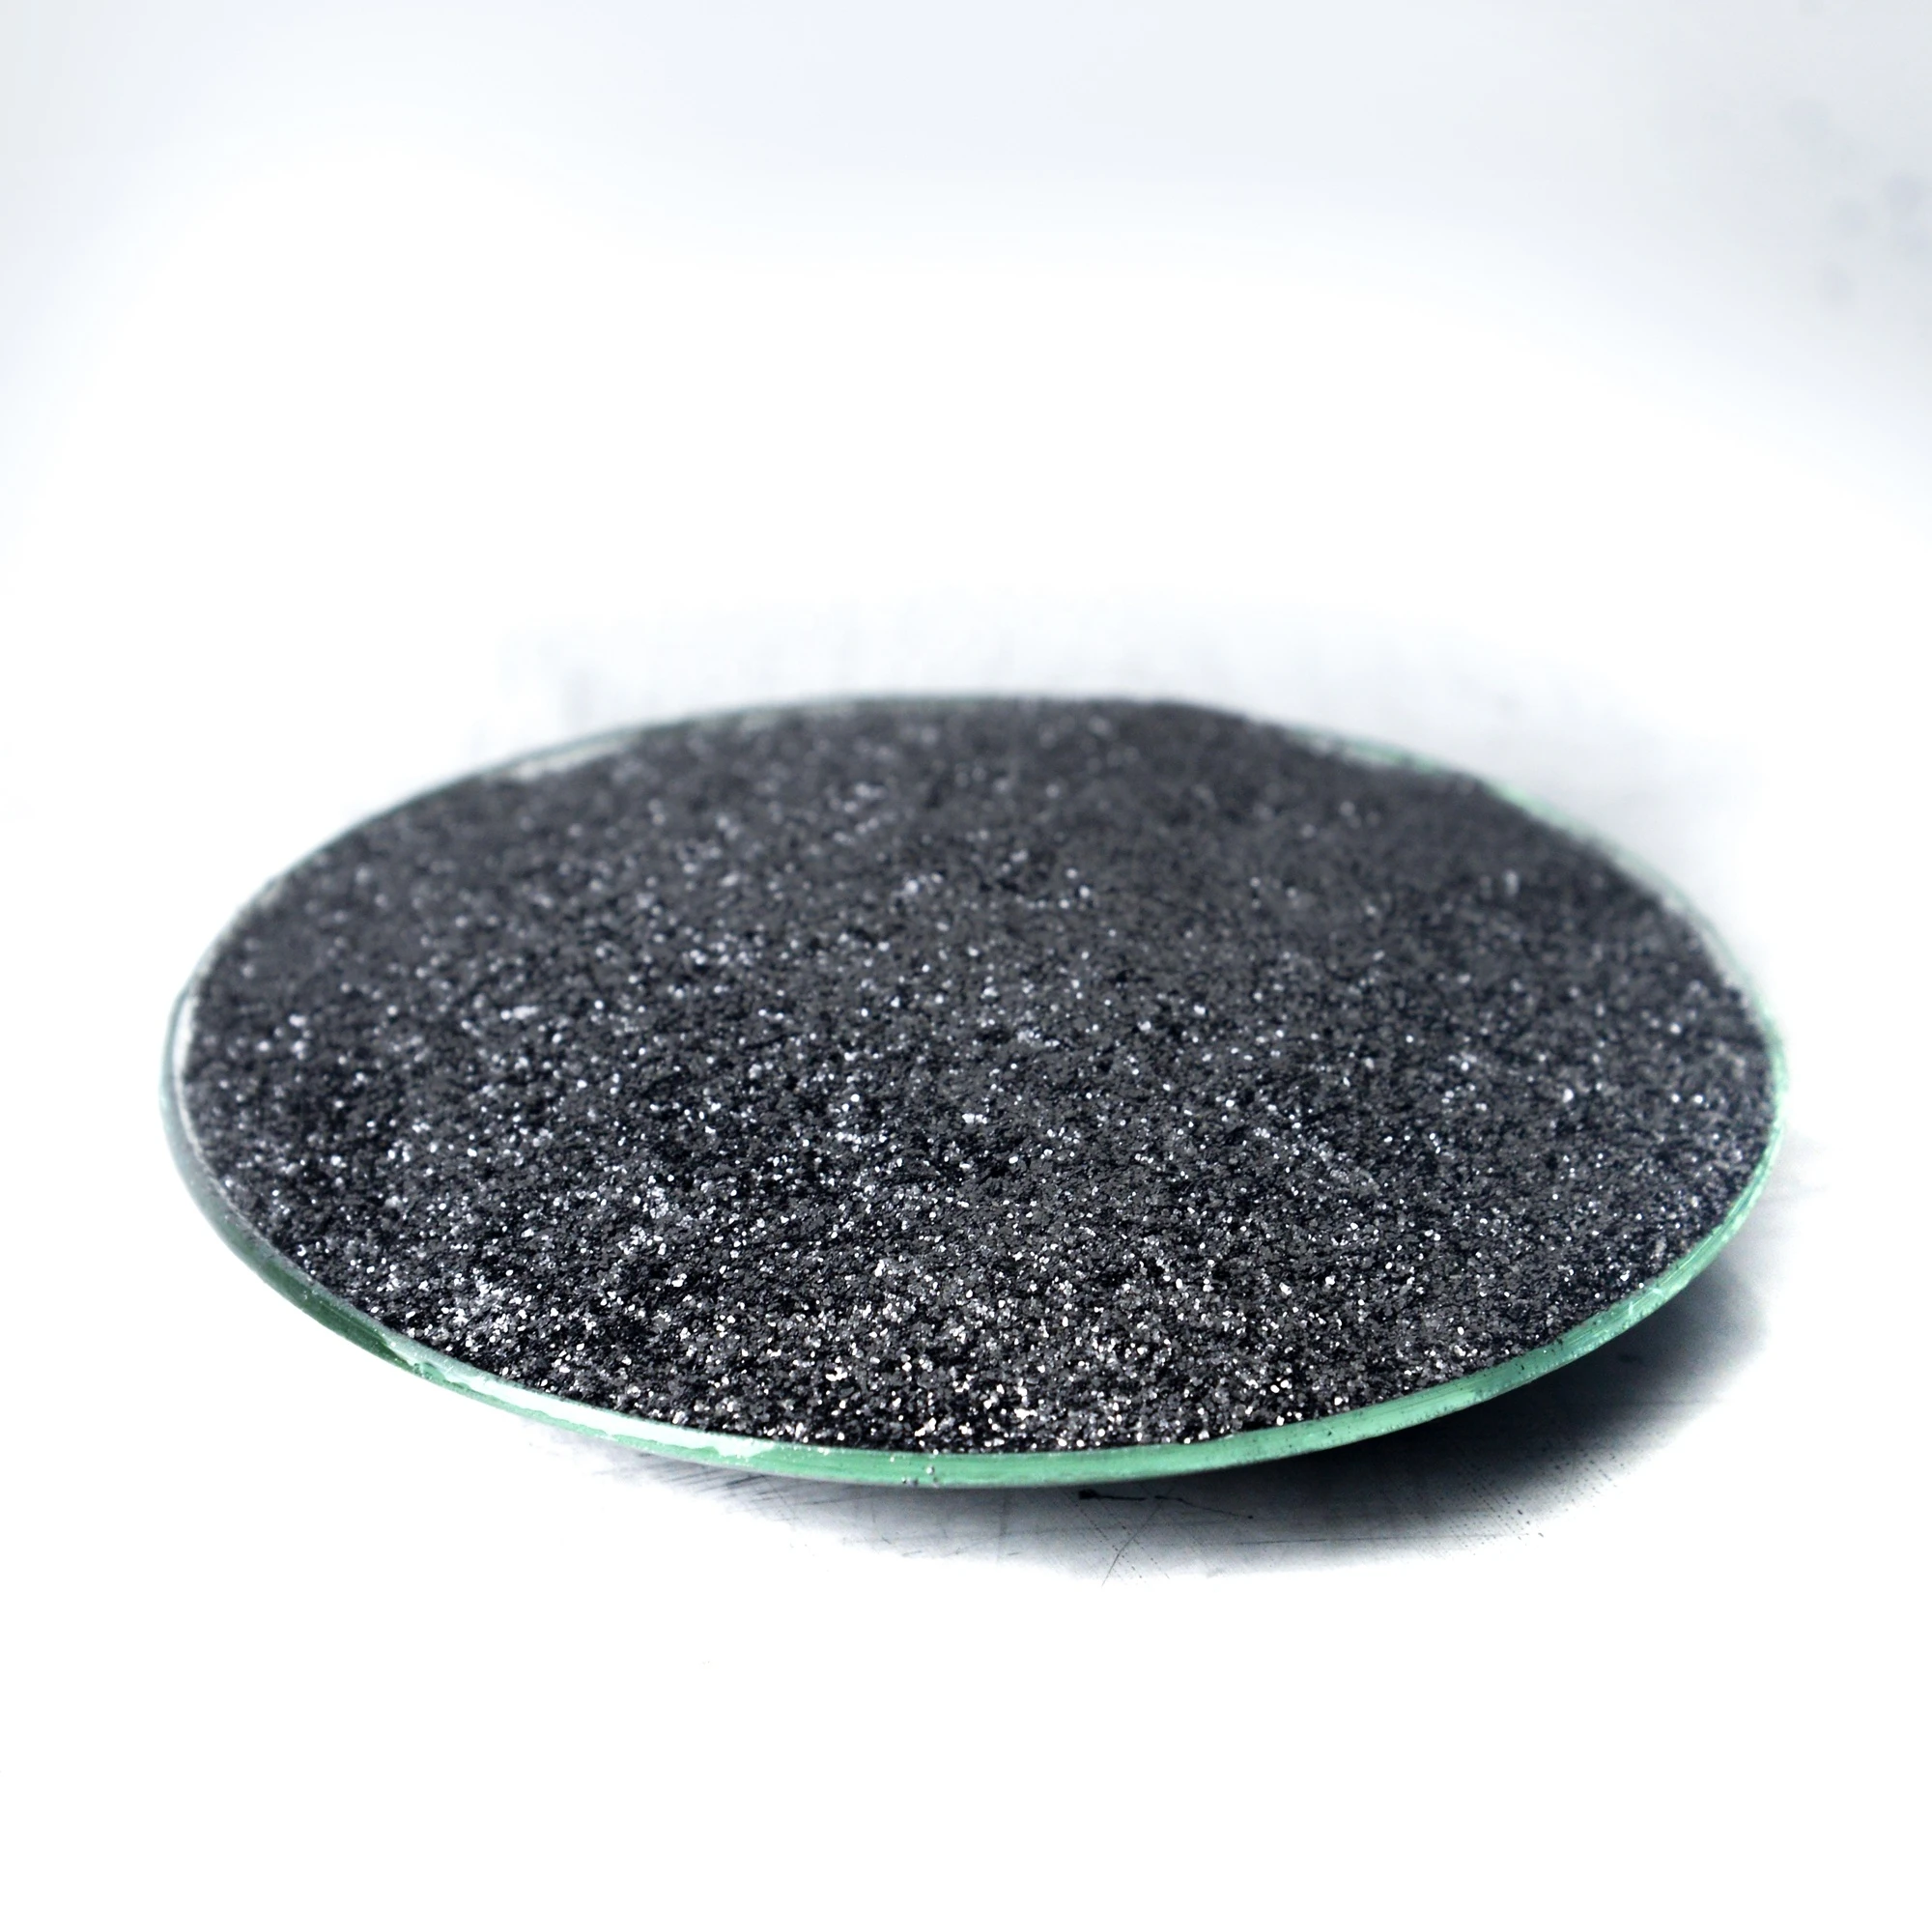 Expandable graphite flame retardant China suppliers natural graphite price thermal conductivty expandable graphite